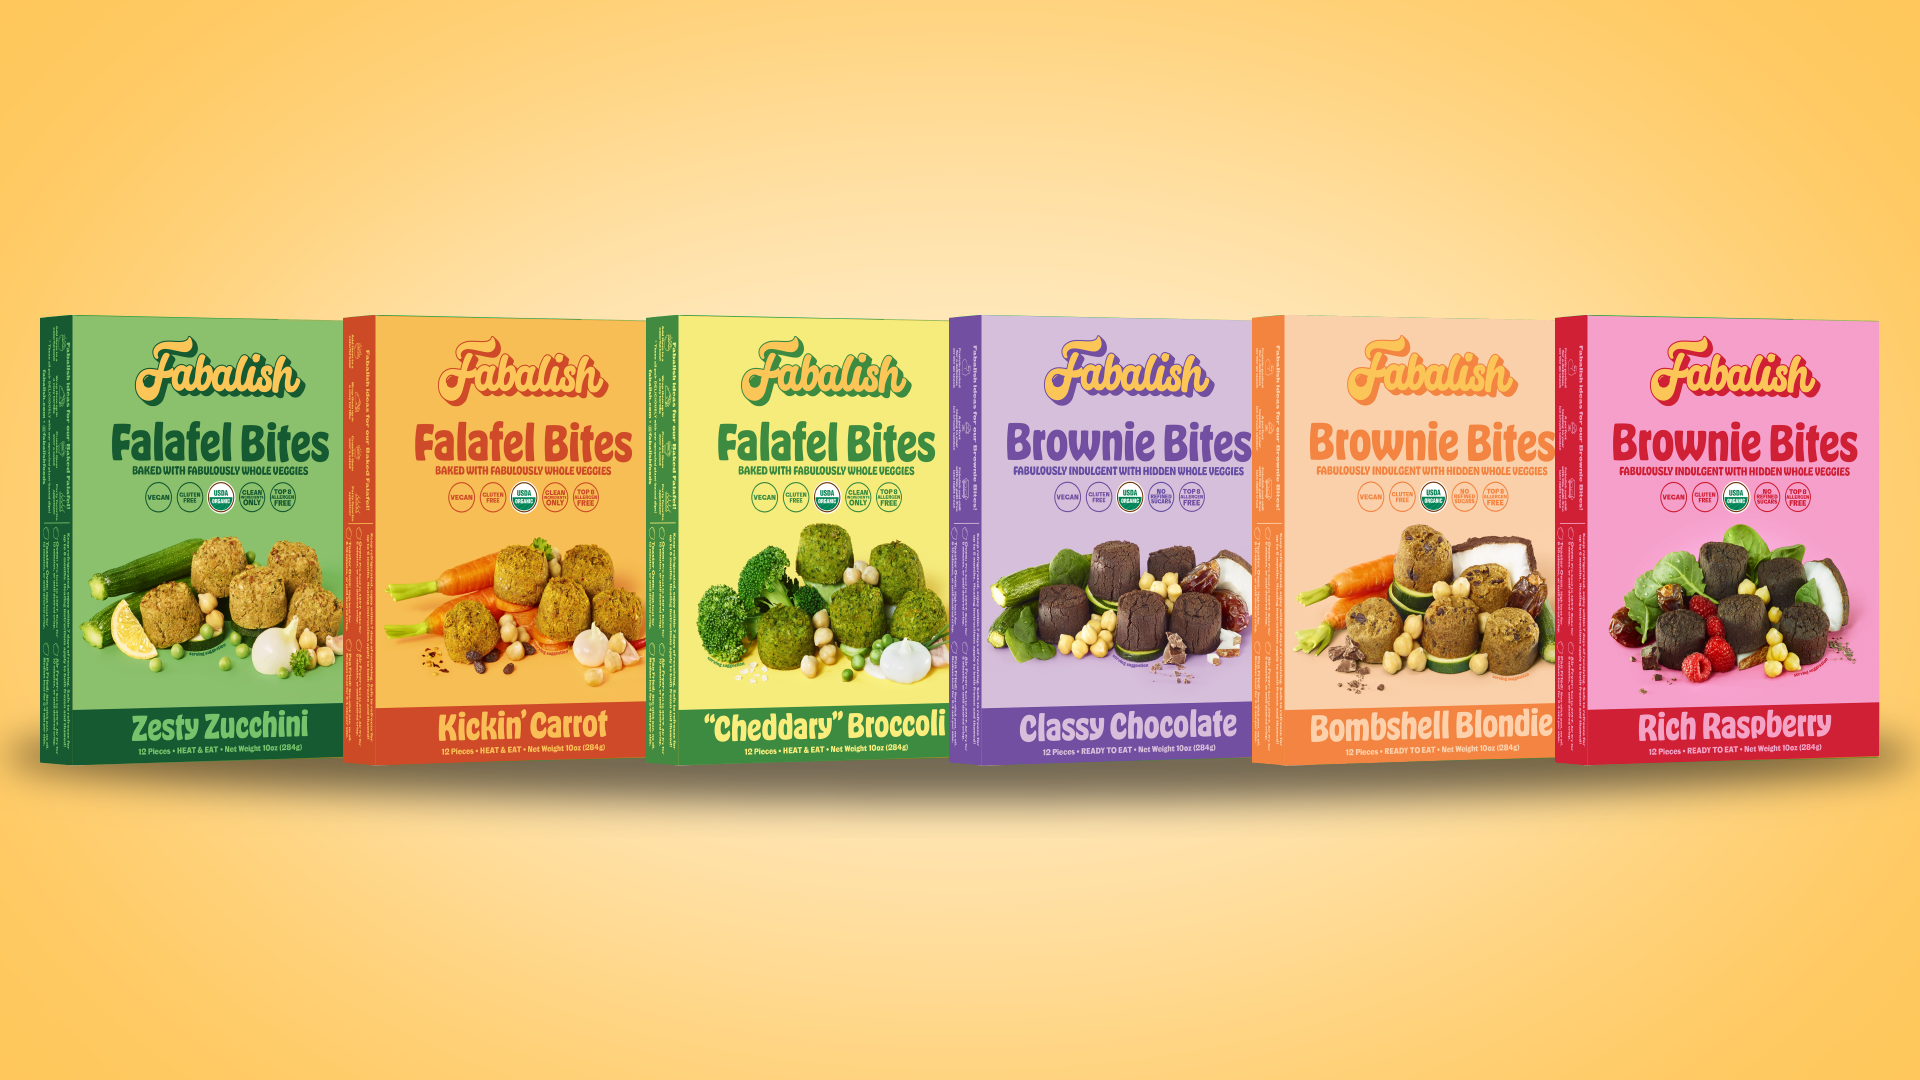 ACB’s Fabalish Brand Refresh Highlights The Fabulousness Of The Chickpea